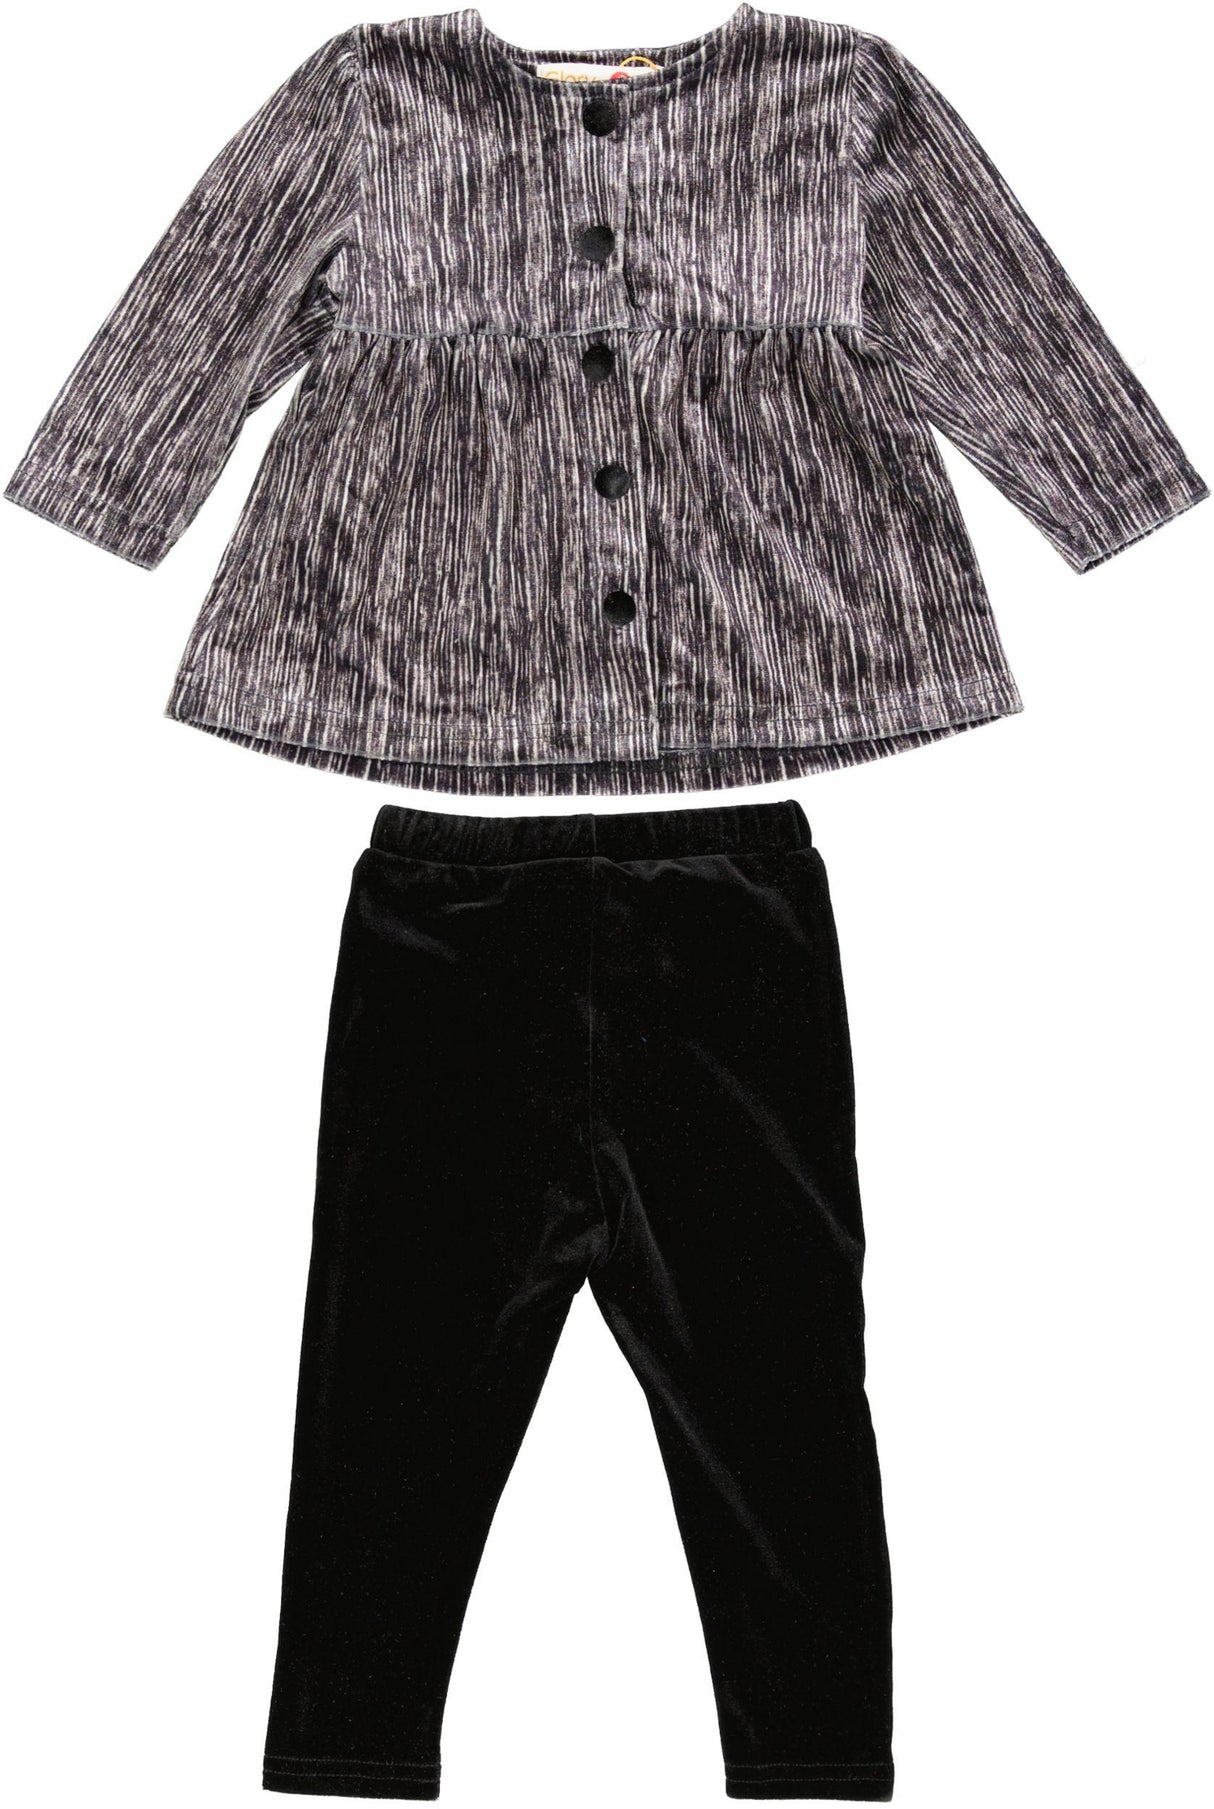 Glory Baby Girls Velour Outfit - 2406182A-2406183A